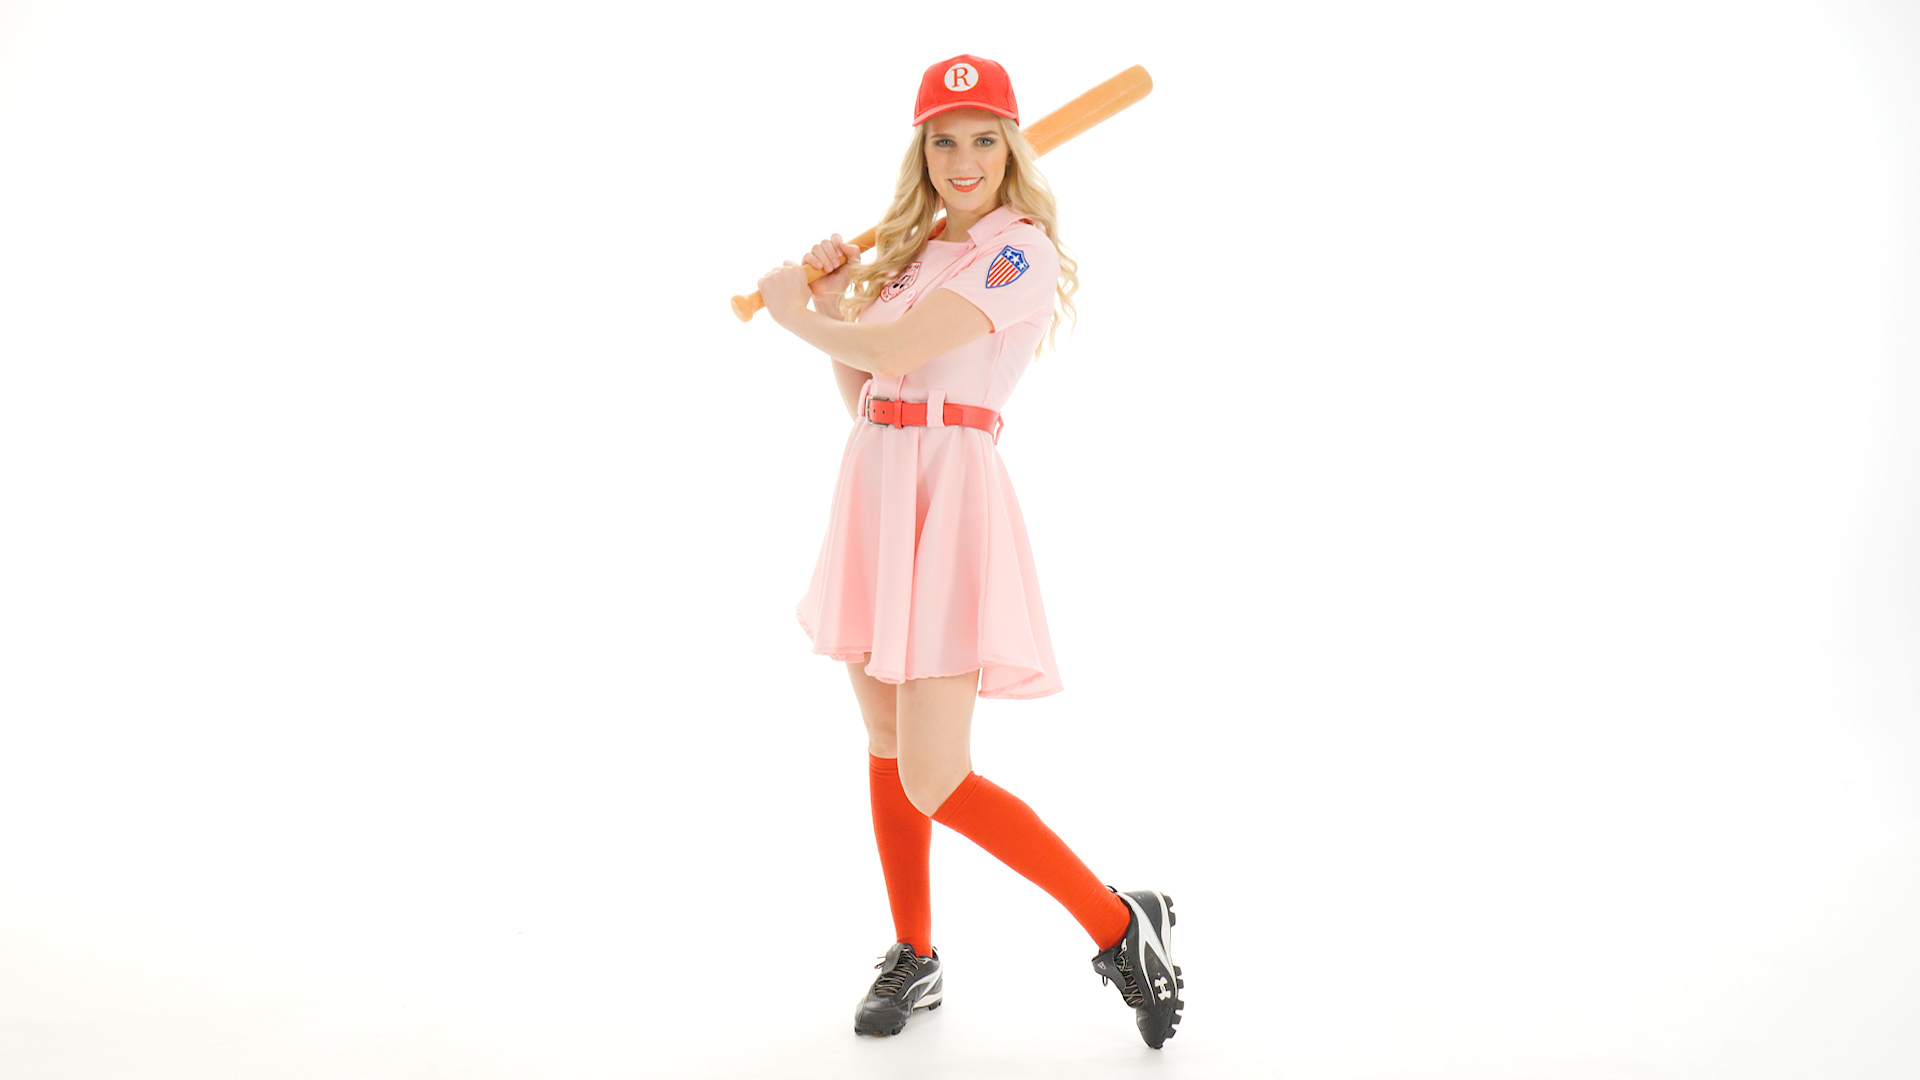 There will be no crying in baseball or on Halloween when you wear this exclusive and spectacular Women's A League of Their Own Dottie Costume!